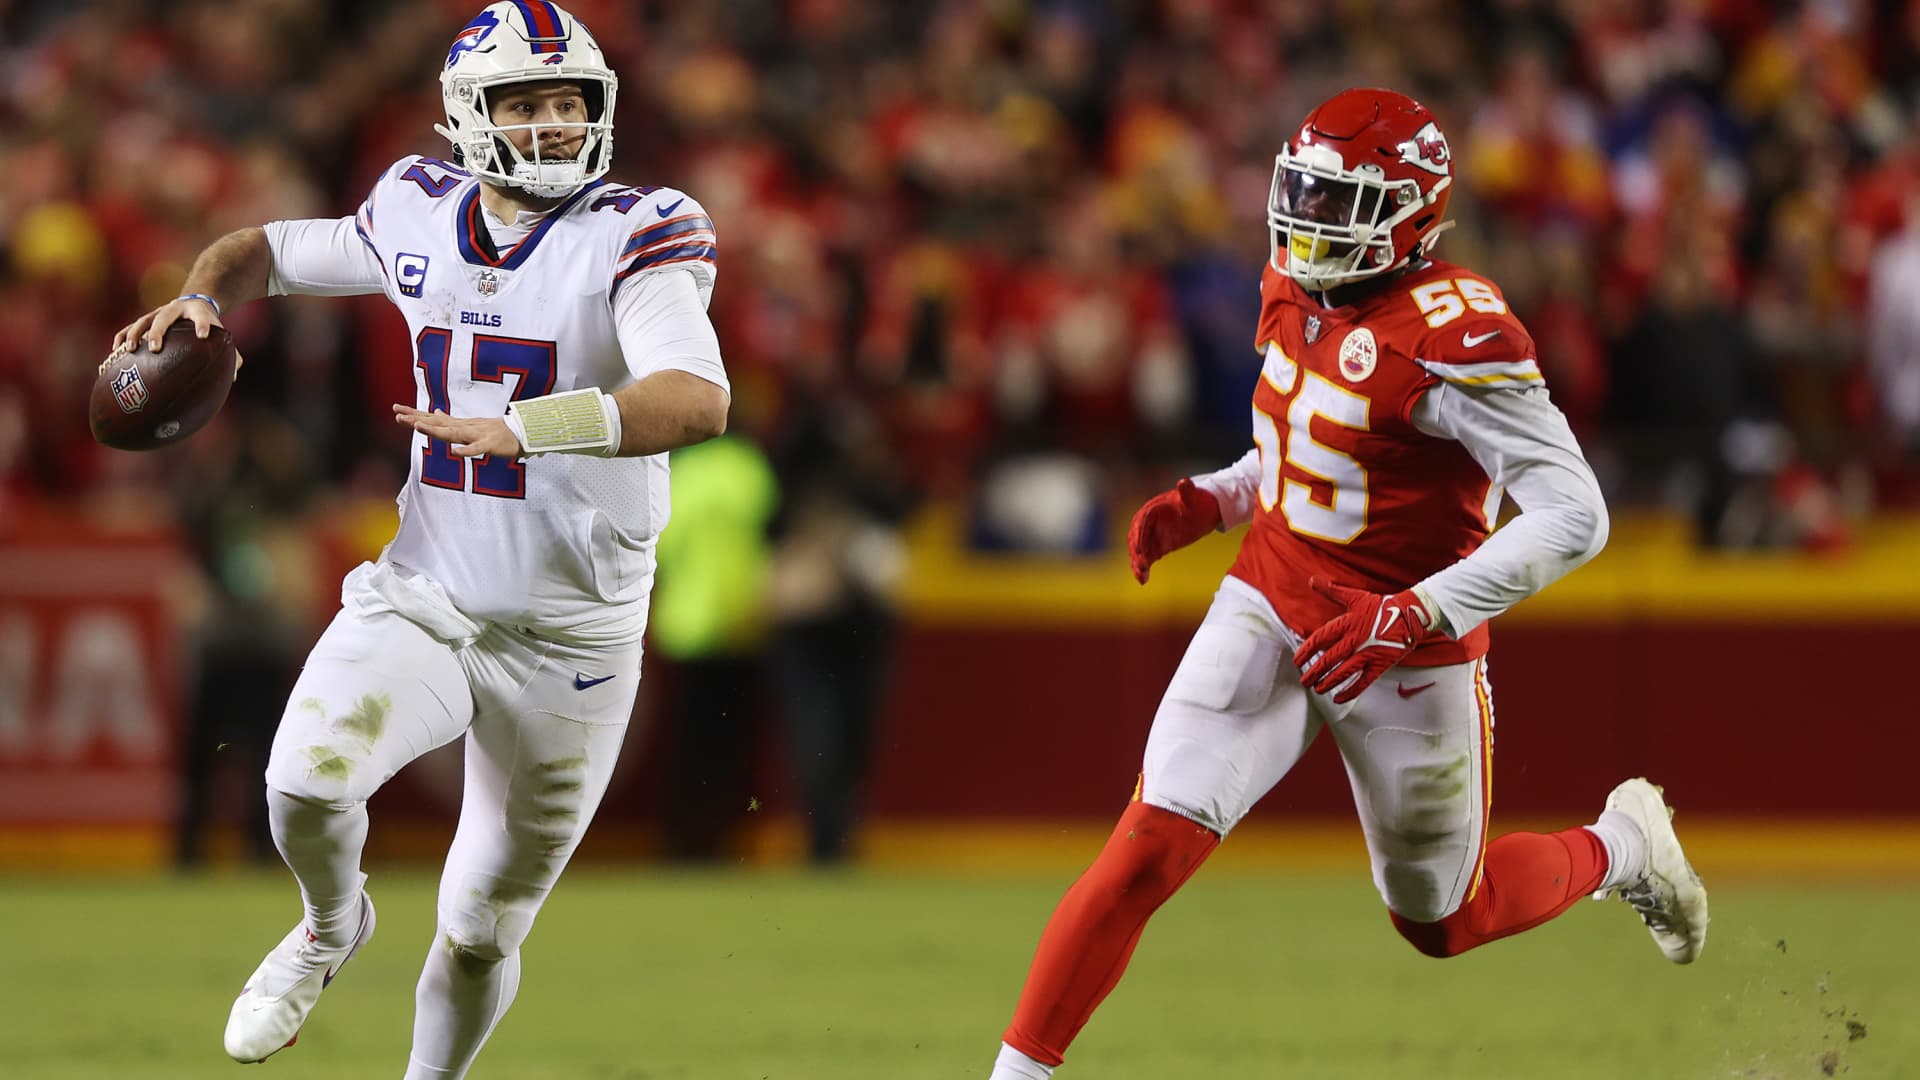 Josh Allen #17 of the Buffalo Bills runs with the ball as Frank Clark #55 of the Kansas City Chiefs defends during the AFC Divisional Playoff game at Arrowhead Stadium on January 23, 2022 in Kansas City, Missouri.